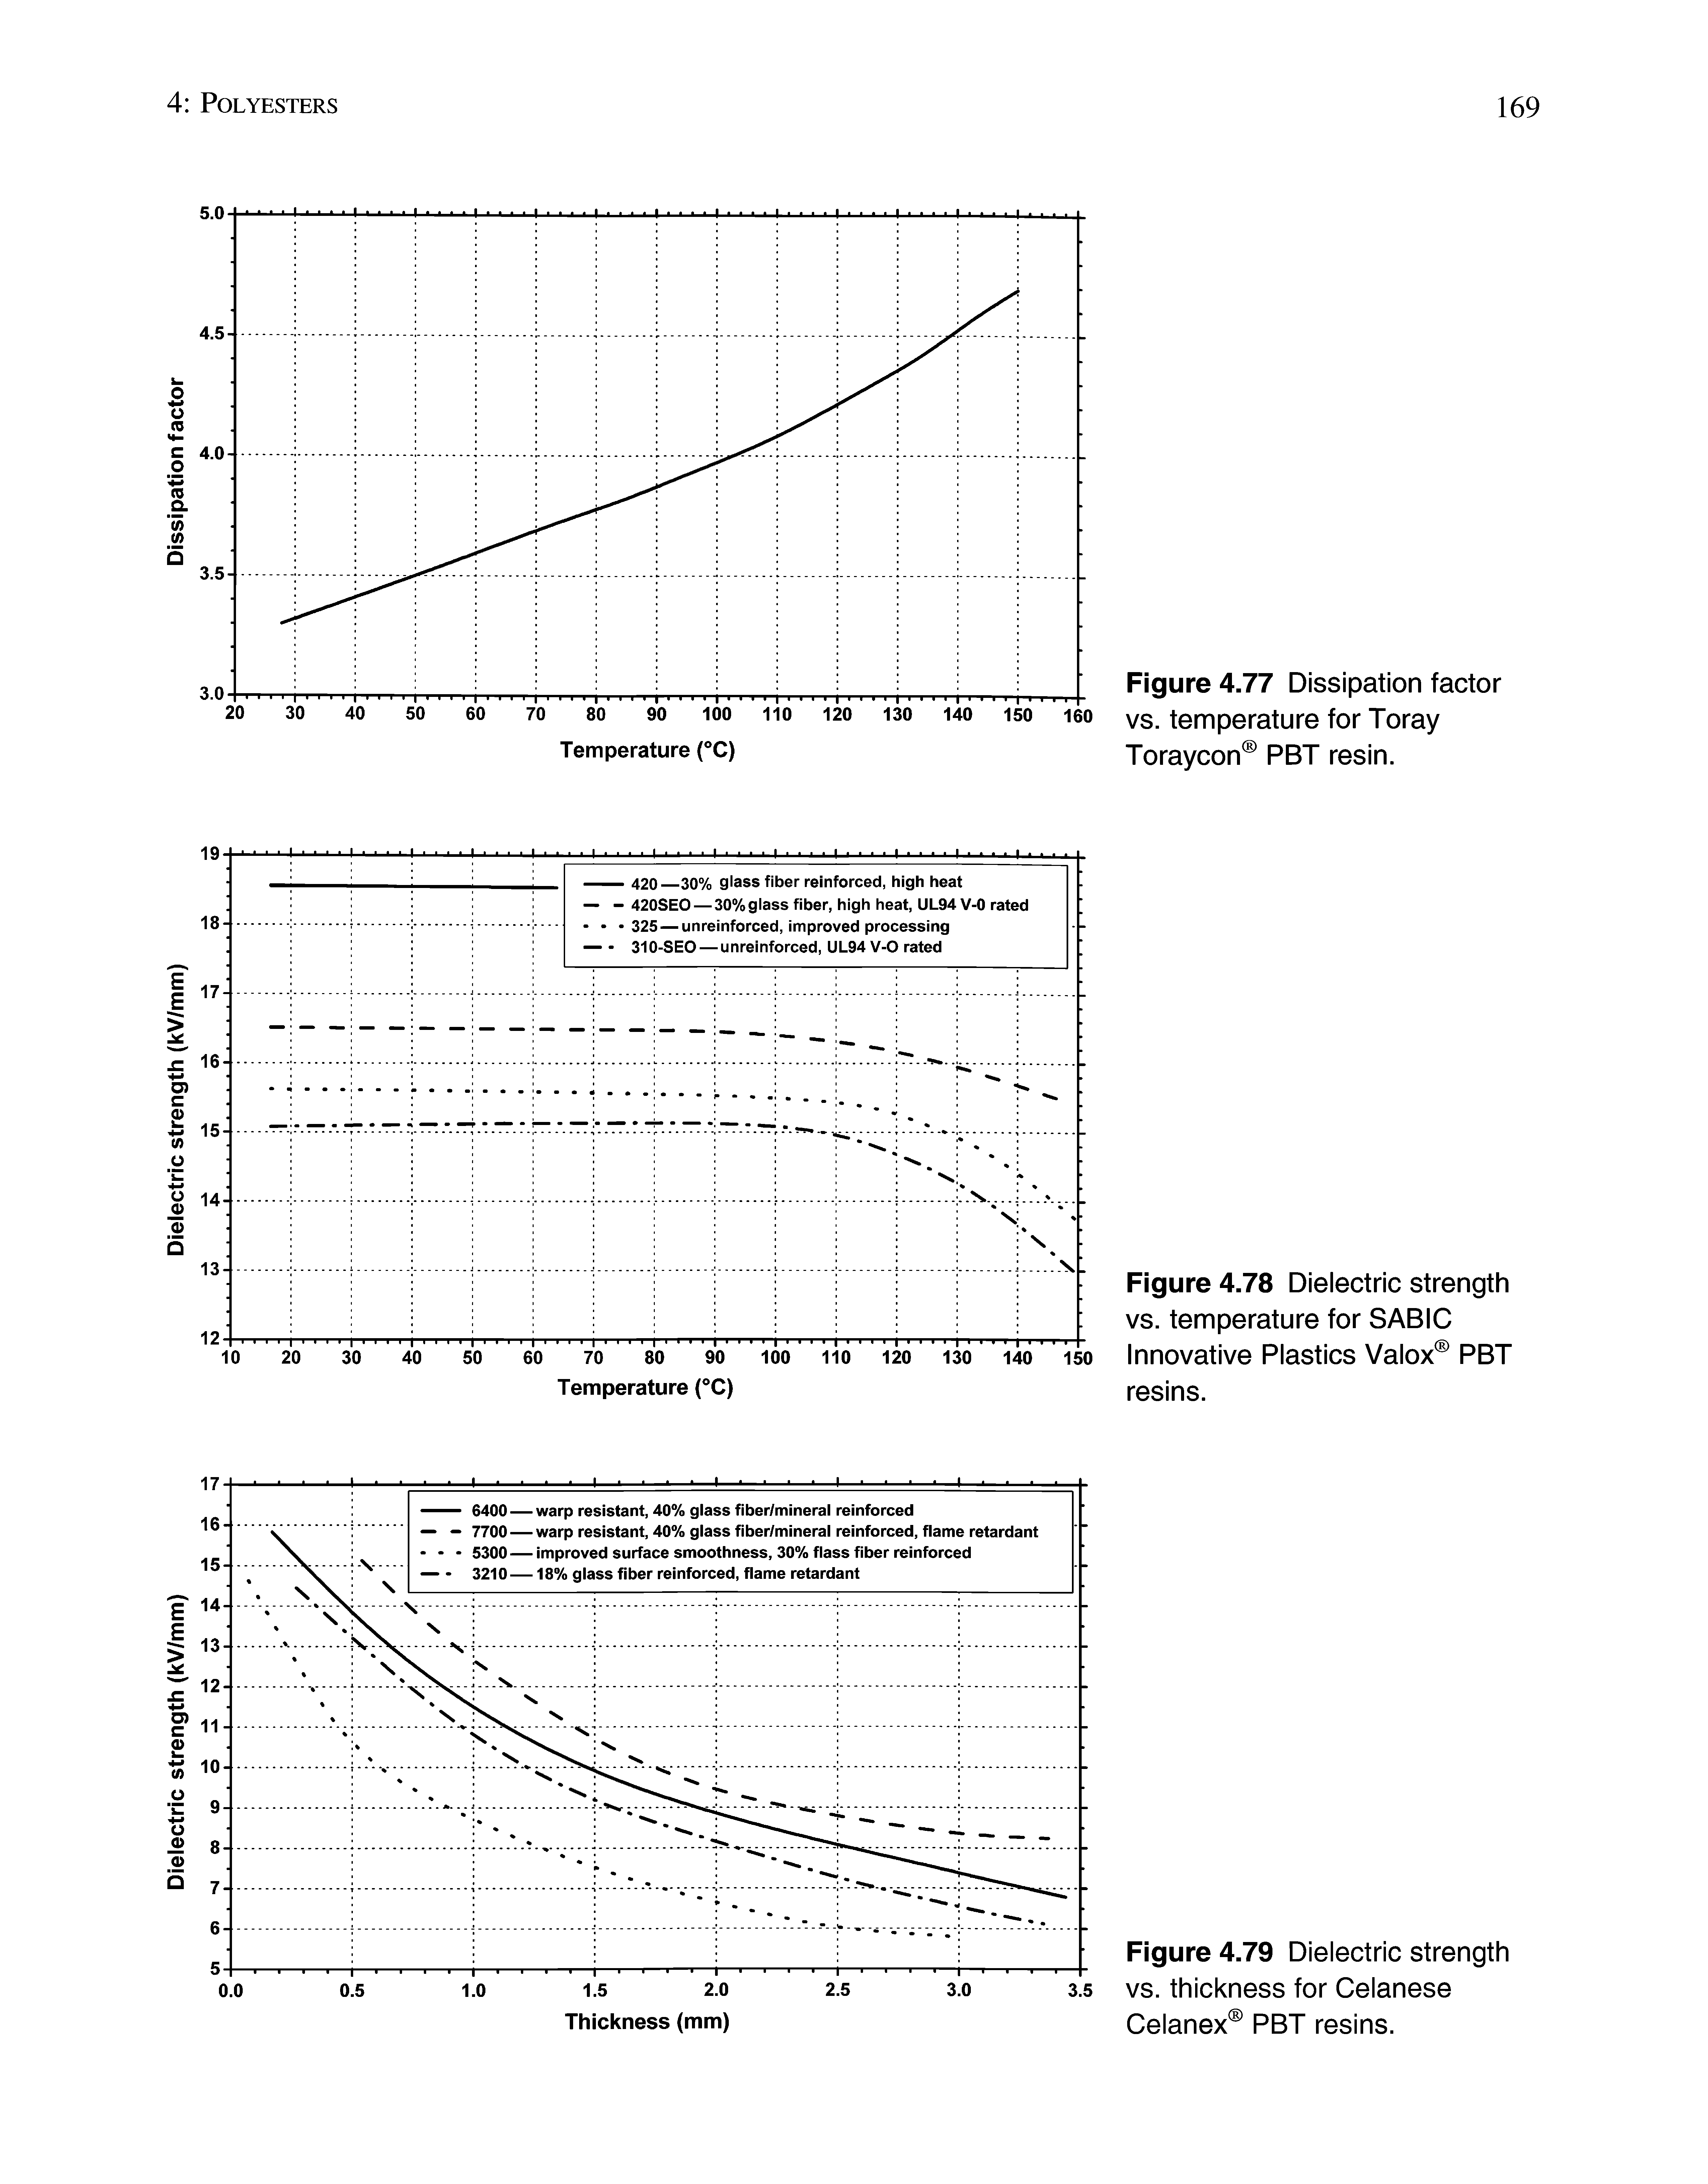 Figure 4.79 Dielectric strength vs. thickness for Celanese Celanex PBT resins.